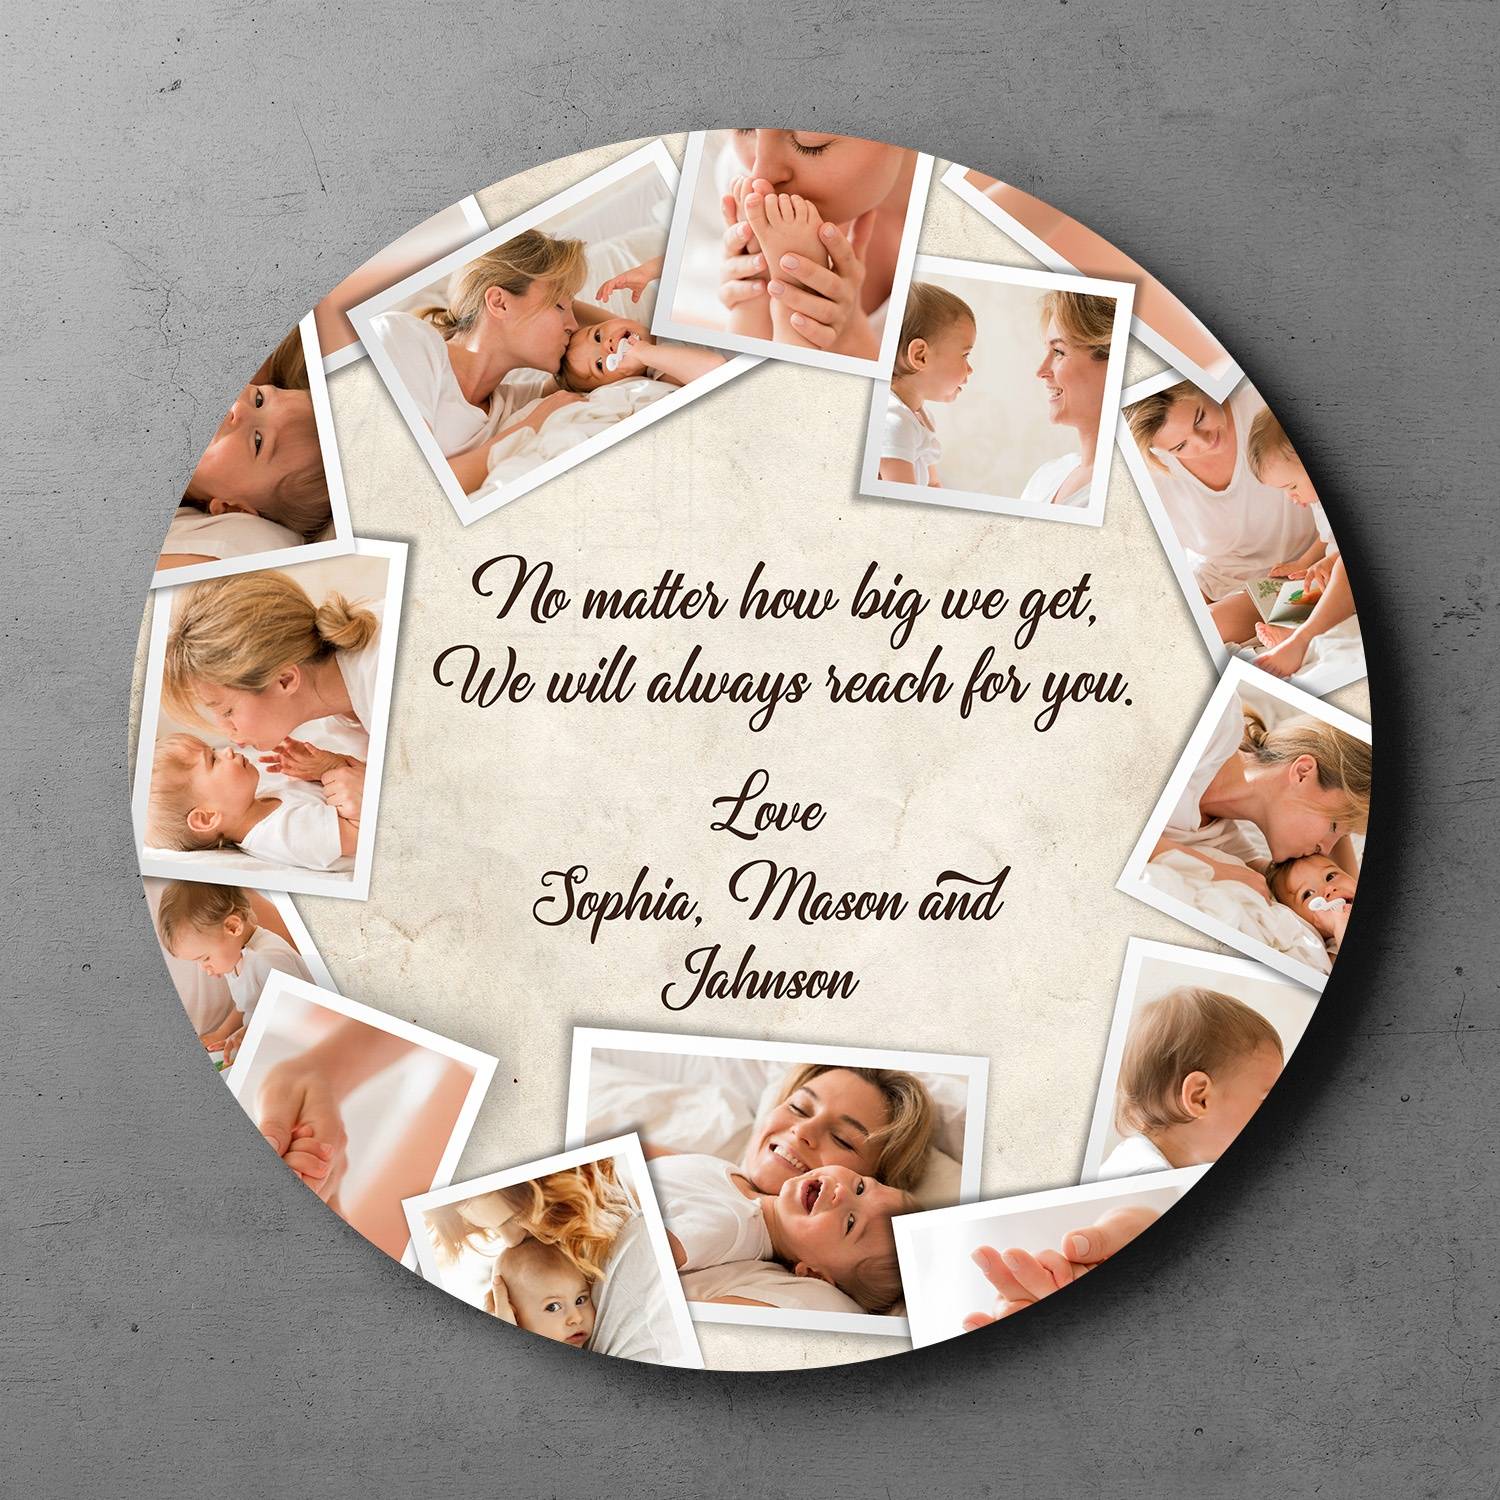 The round wood sign offers you to add photos, names and text. With the elegant design, it's gonna be her favorite home decor.